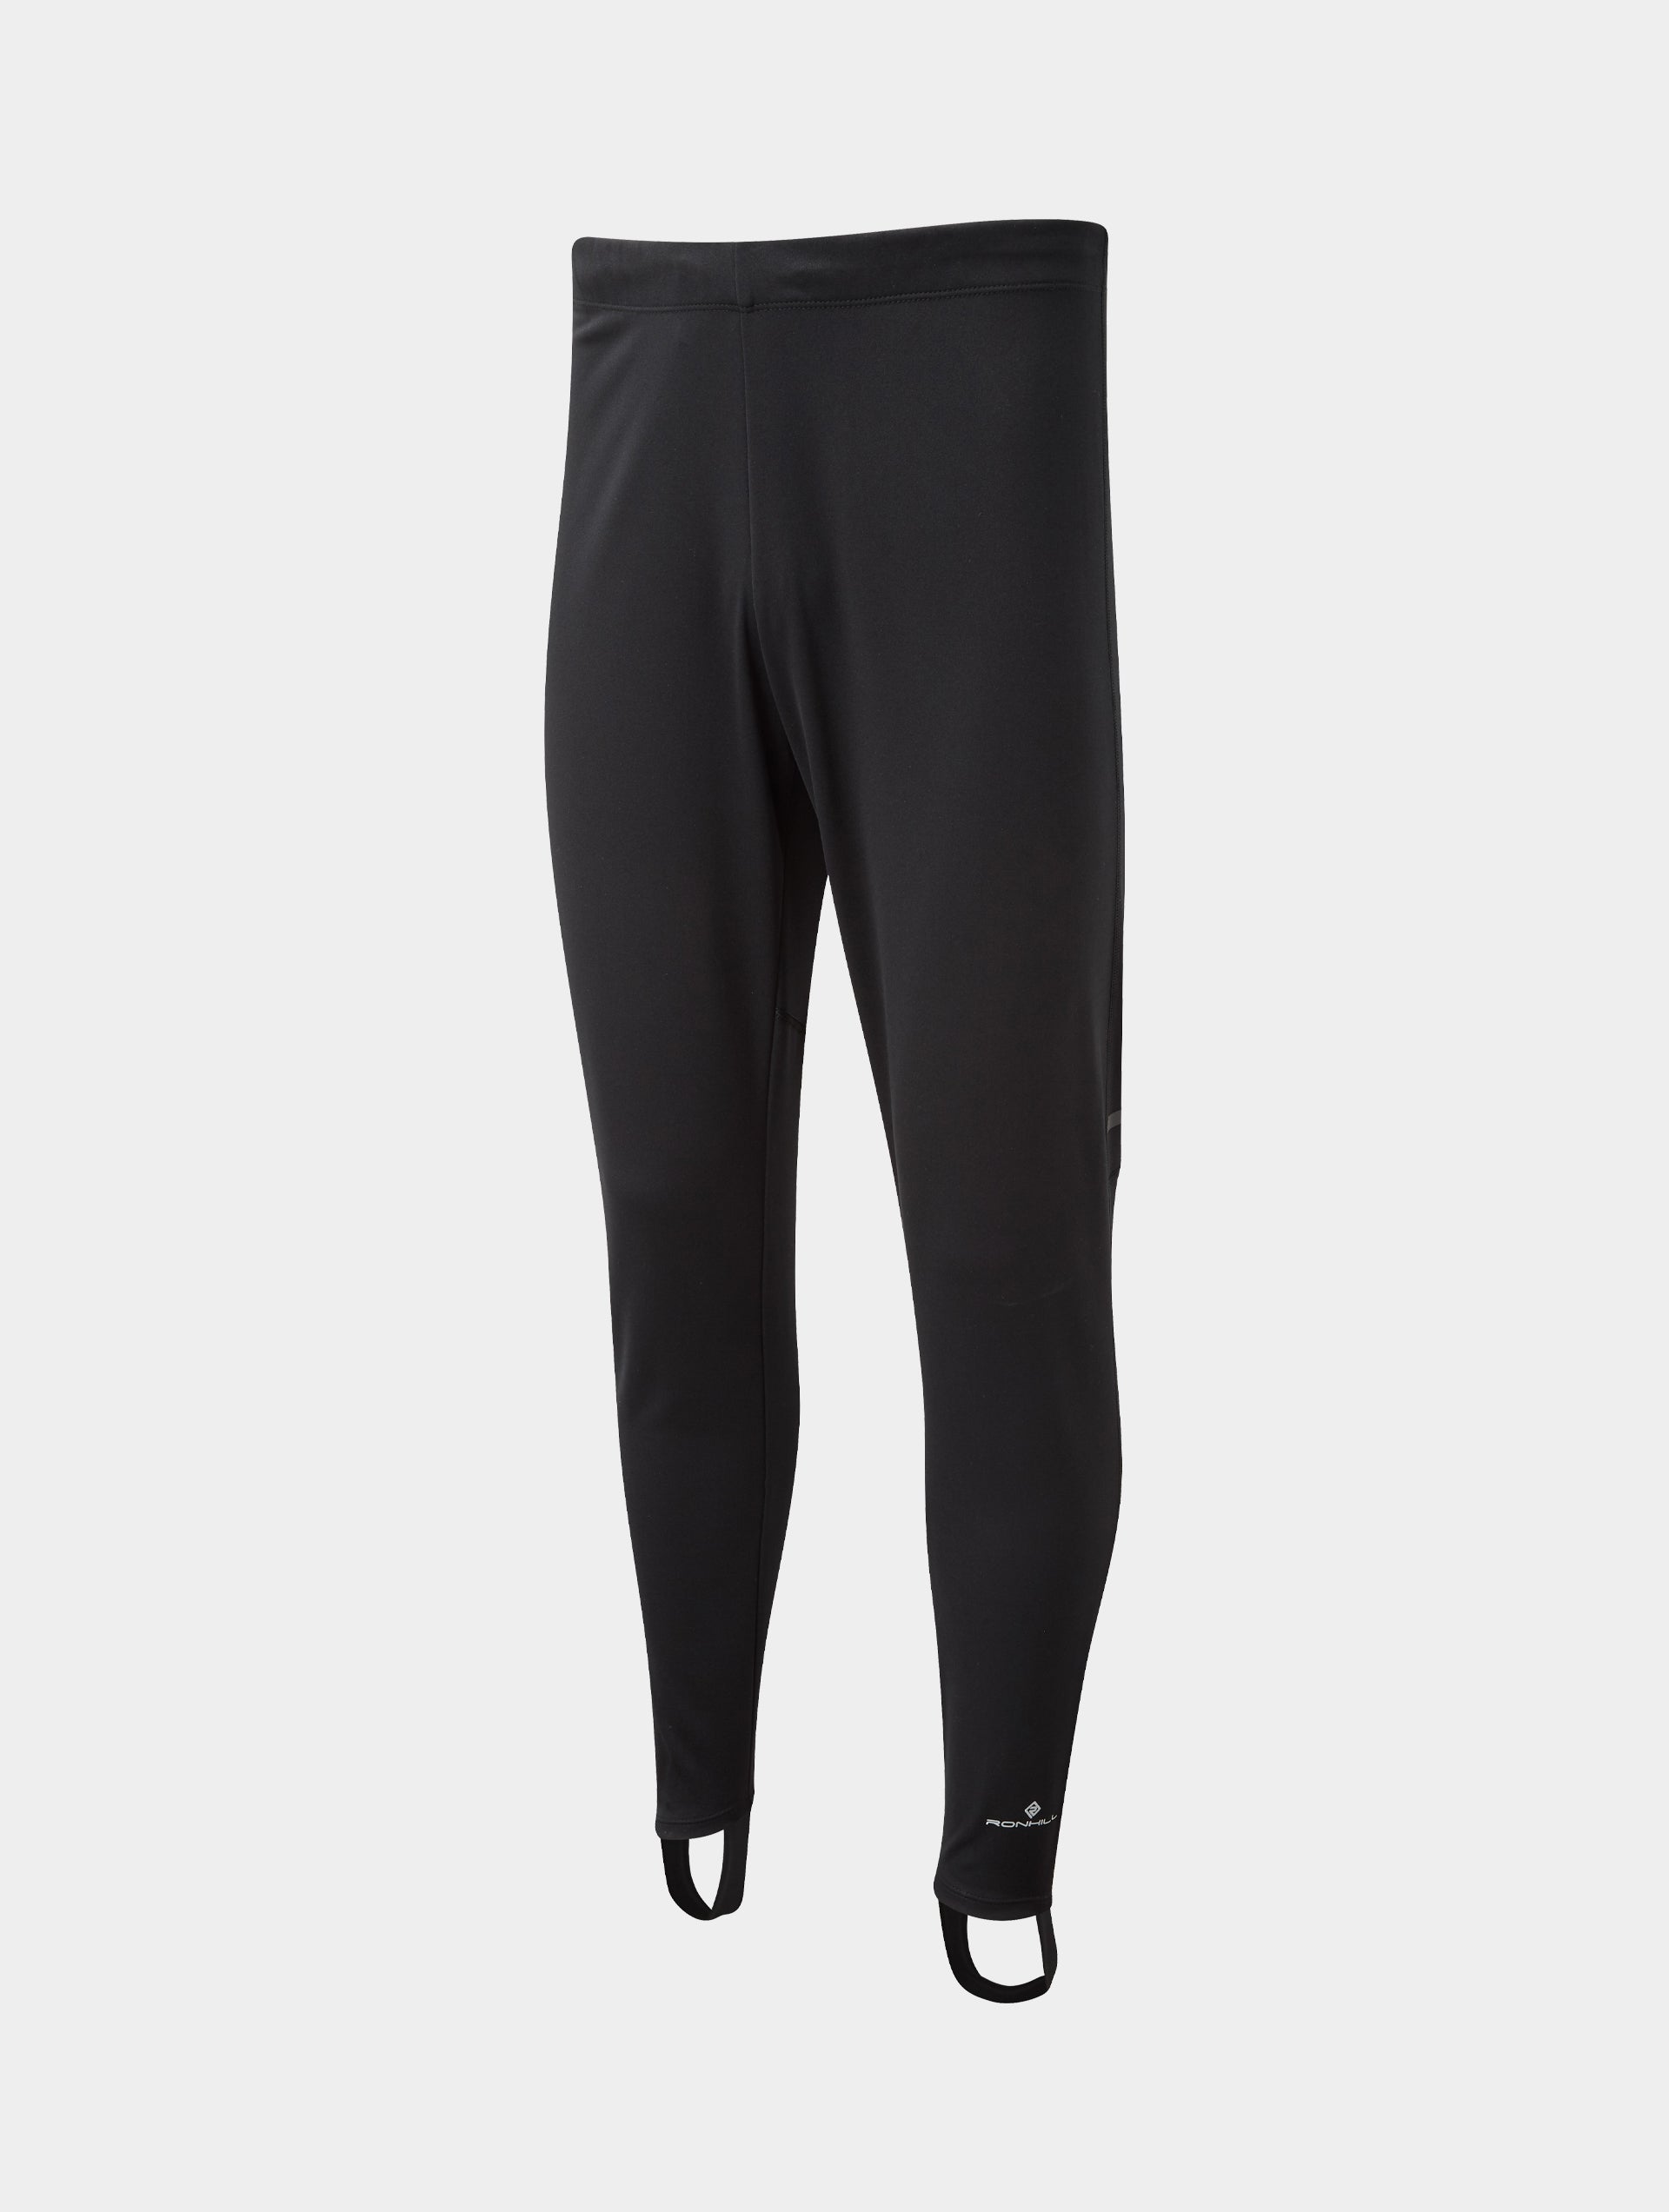 Ronhill Mens Tech Afterhours Tights (Highland/Limstone/Reflect)